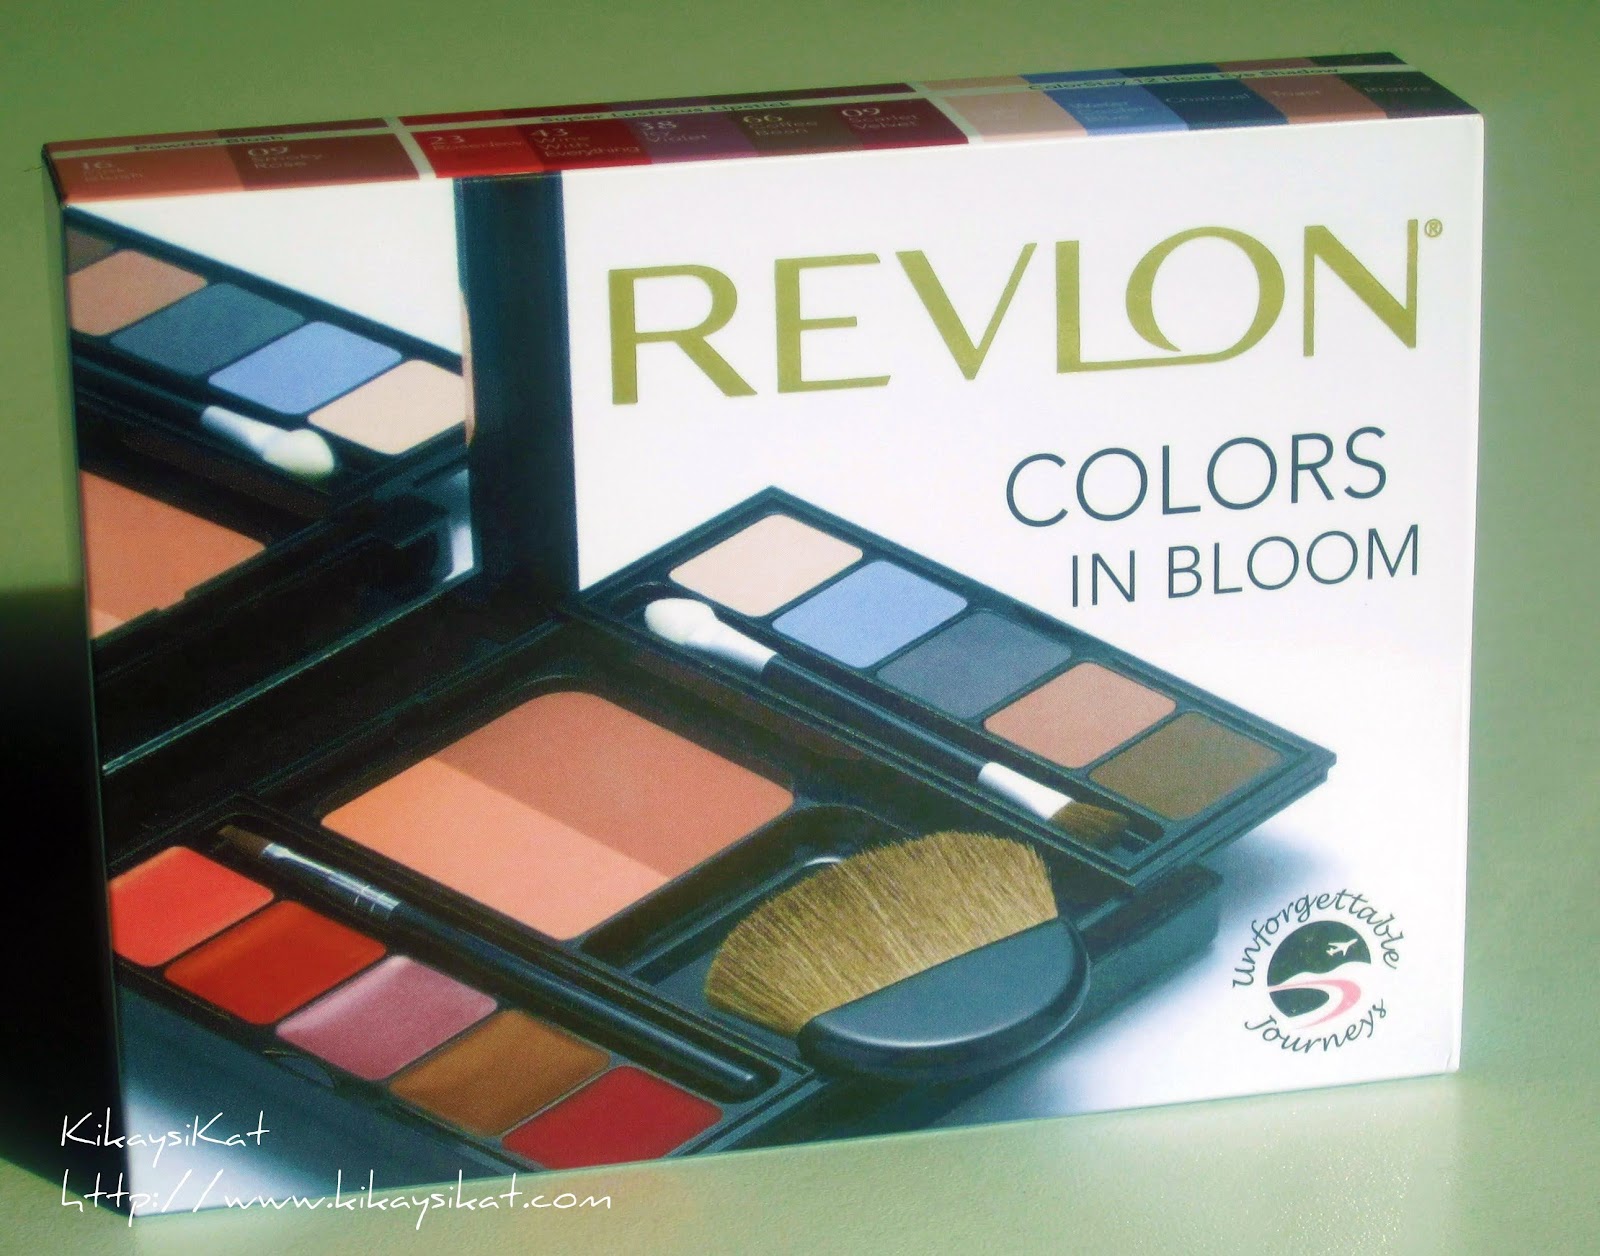 Metropolitan himmelsk Allieret Review: Revlon Colors in Bloom Palette Swatches and Short Review -  KIKAYSIKAT